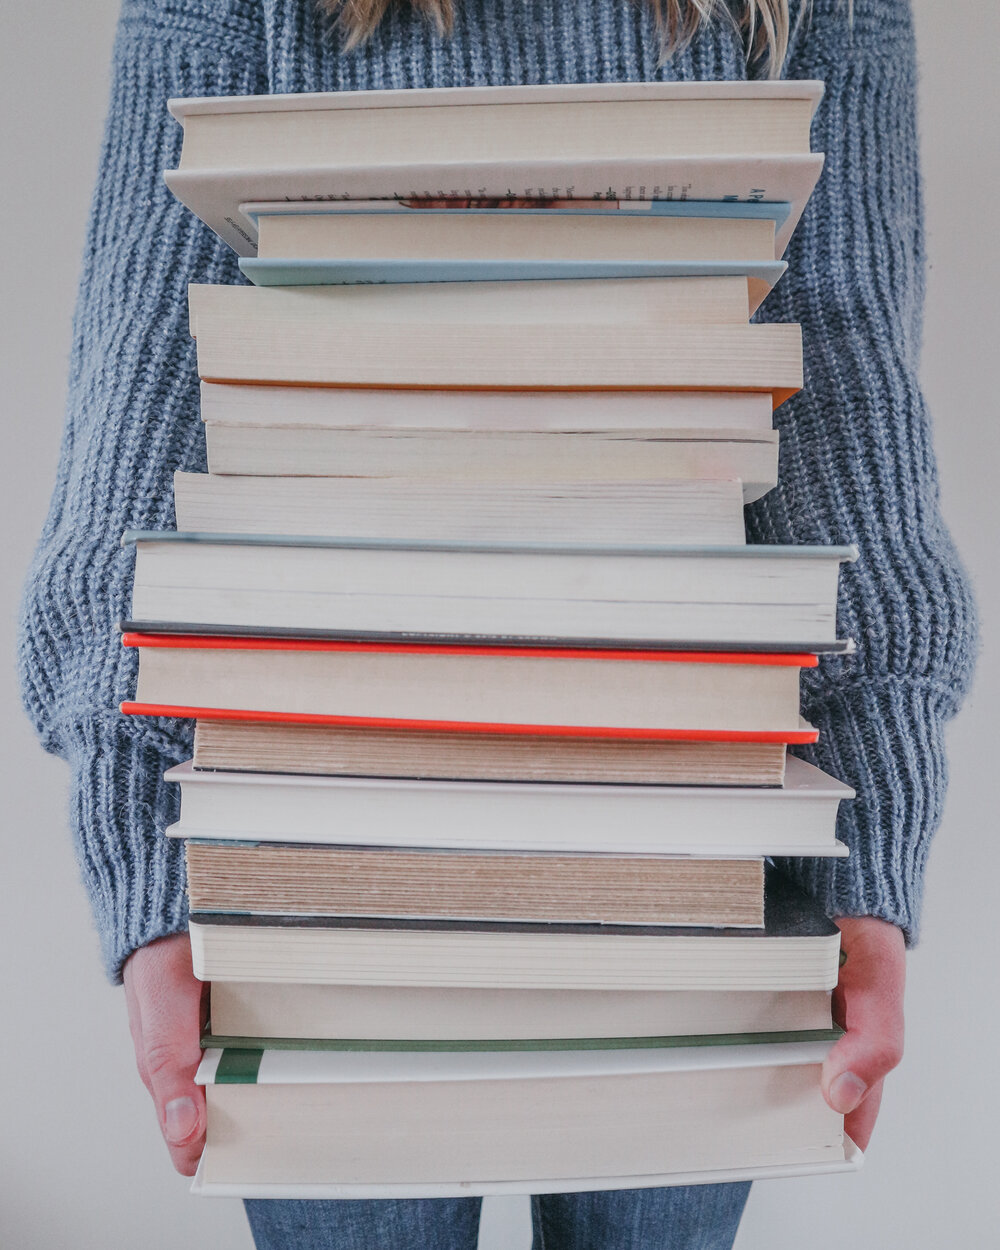 The top ten books to read in your 20s: maximize productivity, creativity and success in every area of your life. This is my full list of books that changed my life for the better and helped me start living the best one IMAGINABLE!